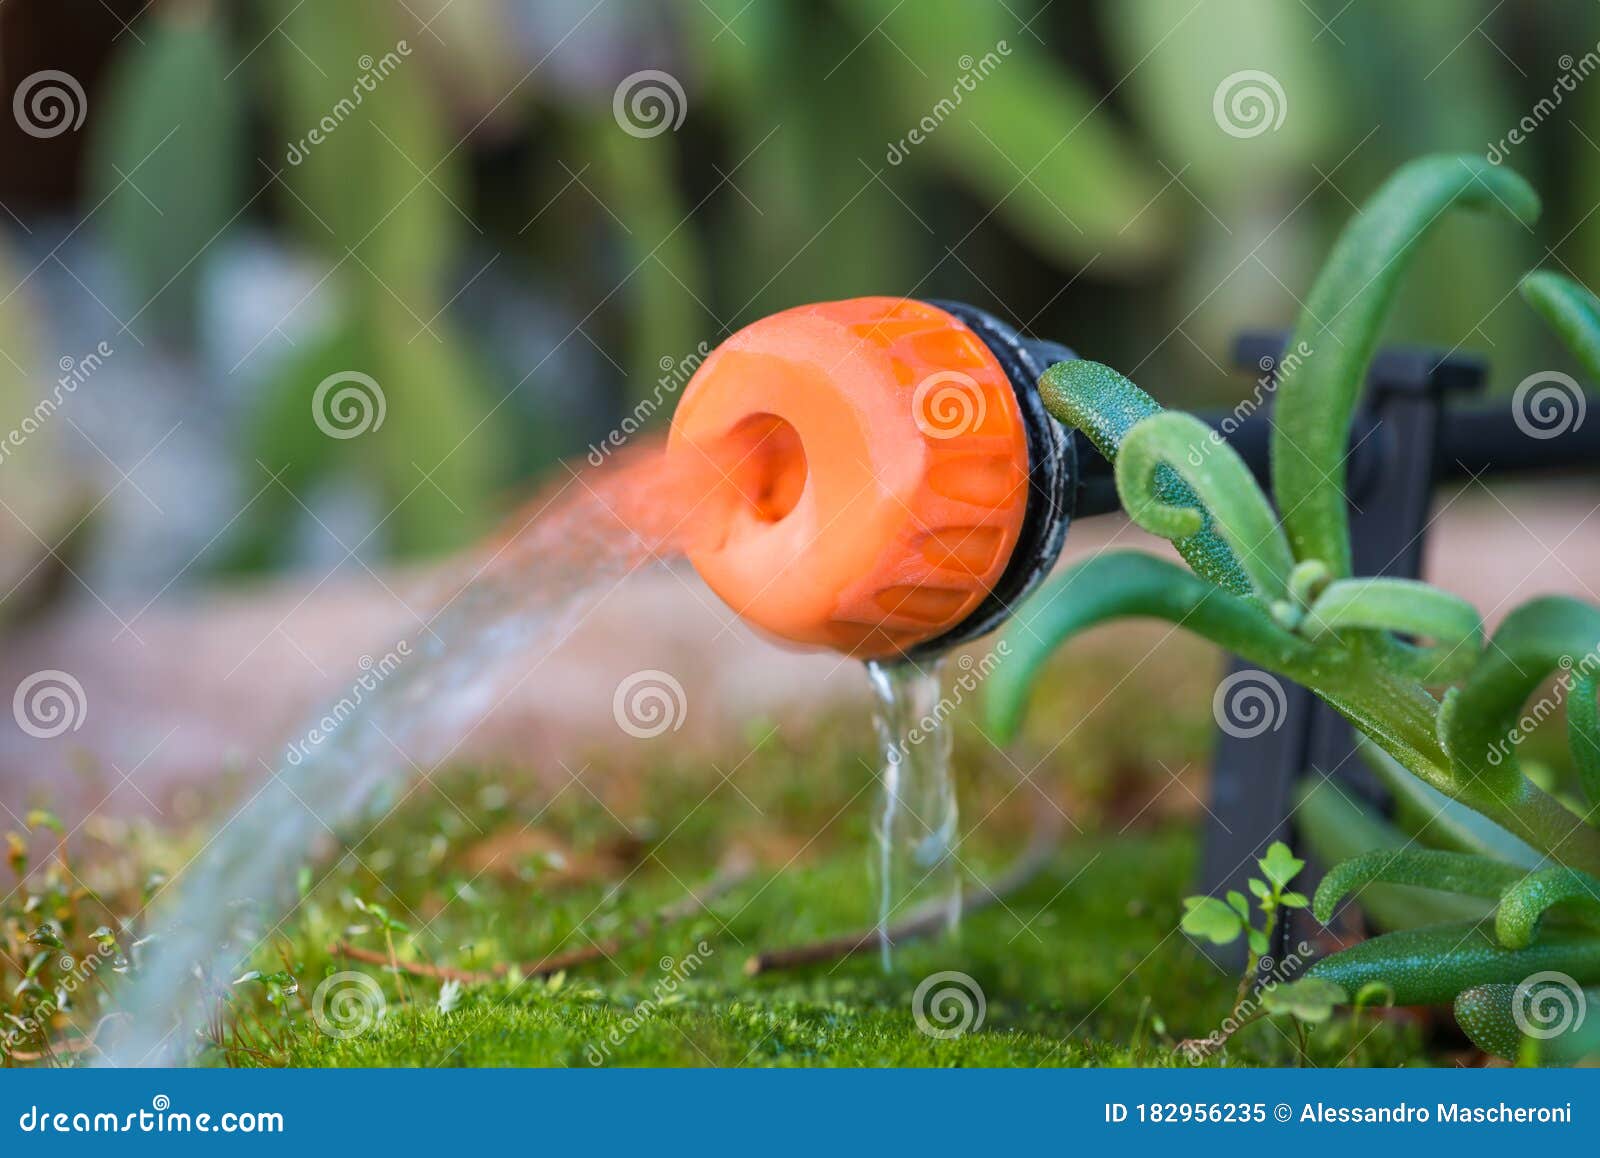 Micro Drip Irrigation System Close Up Of A Drip Head In A Plant Pot Stock Image Image Of Macro Bush 182956235